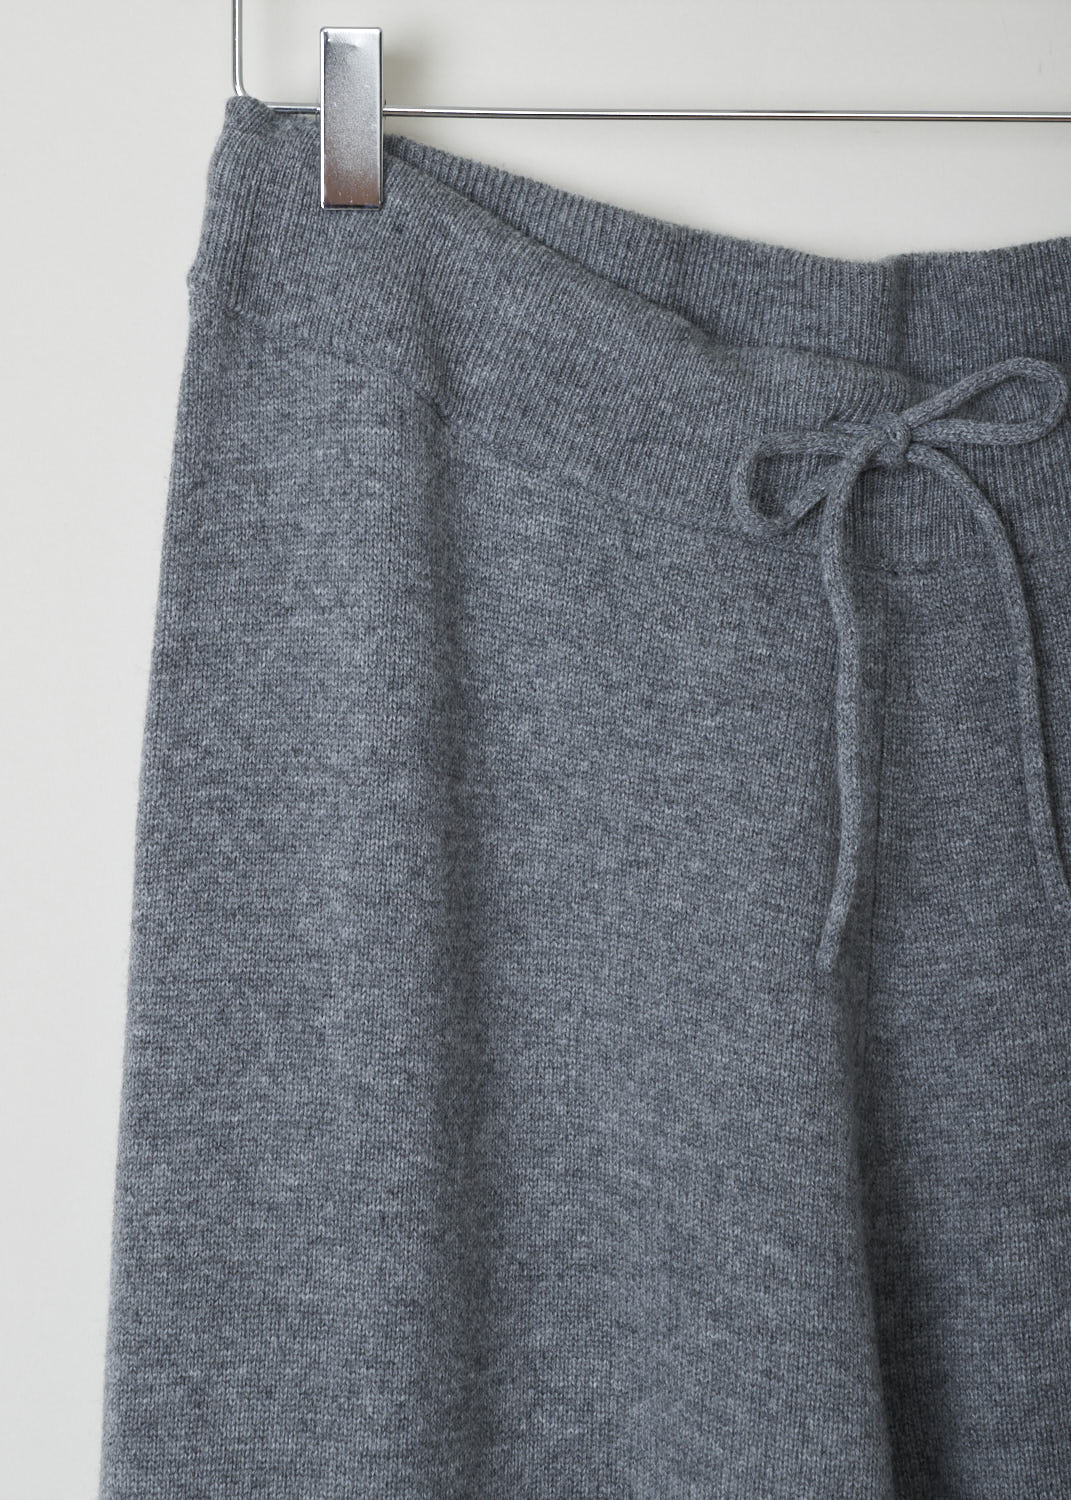 CLOSED, GREY KNITTED PANTS WITH DRAWSTRING, KNITTED_PANTS_C91007_92B_22_164, Grey, Detail, Beautiful wool knitted pants. The pants have a ribbed elastic waistband, as well as a drawstring. That same ribbed detailing can be found on the pant cuffs. 
